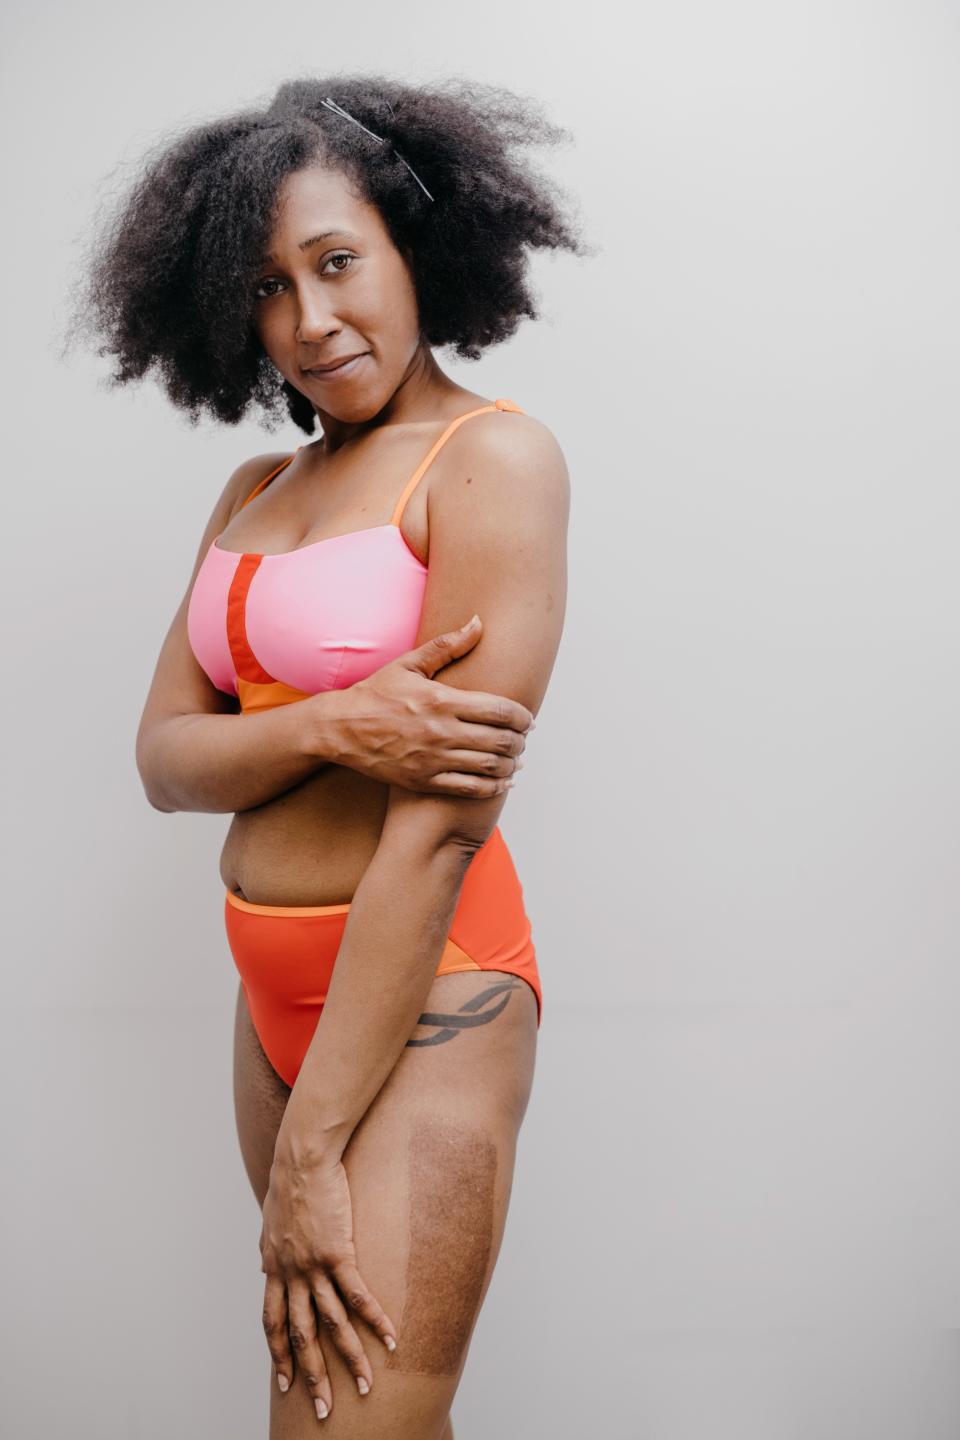 Miga Swimwear wants to change the way we think about disfigurement by creating one-pieces and bikinis designed with that in mind.